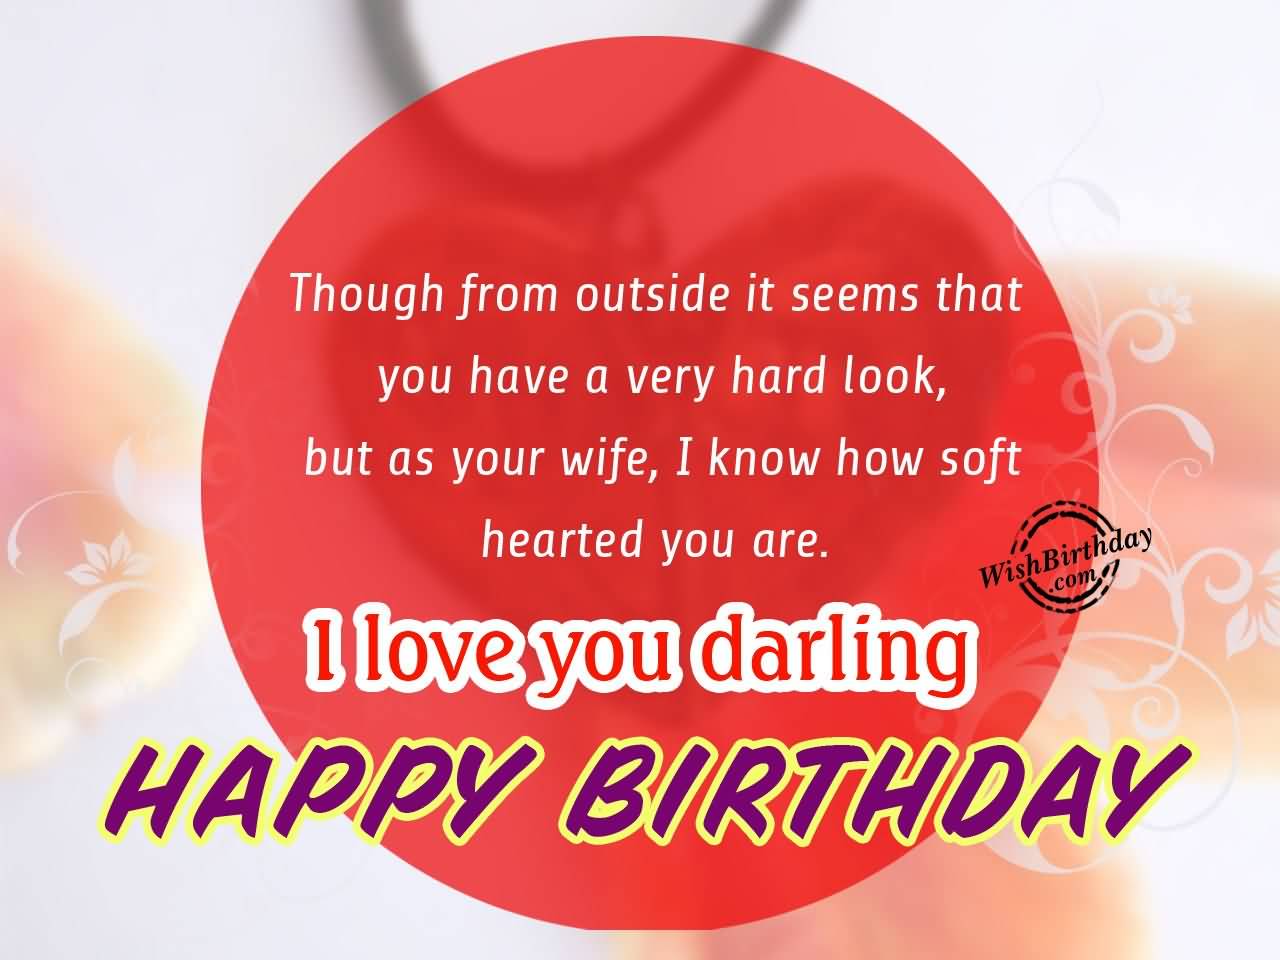 Though From Outside It Seems Happy Birthday Images For Husband Free Download